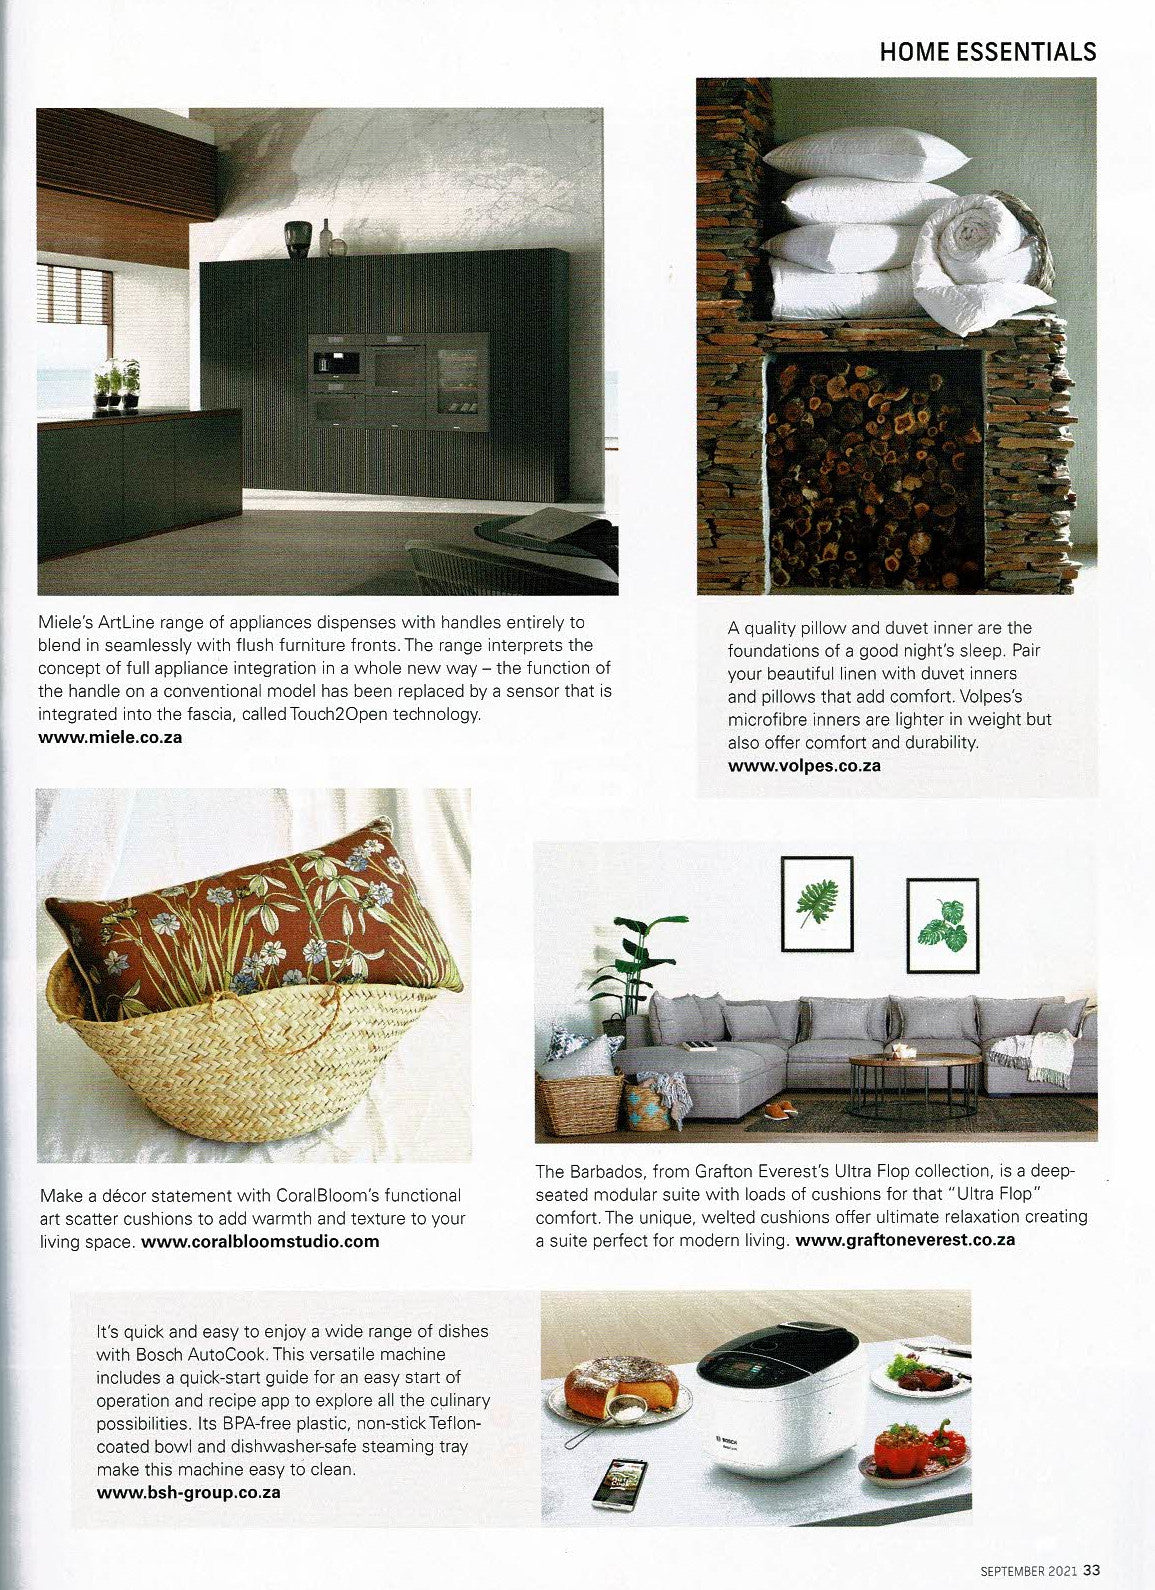 CoralBloom Studio featured in SA Home Owner magazine September 2021